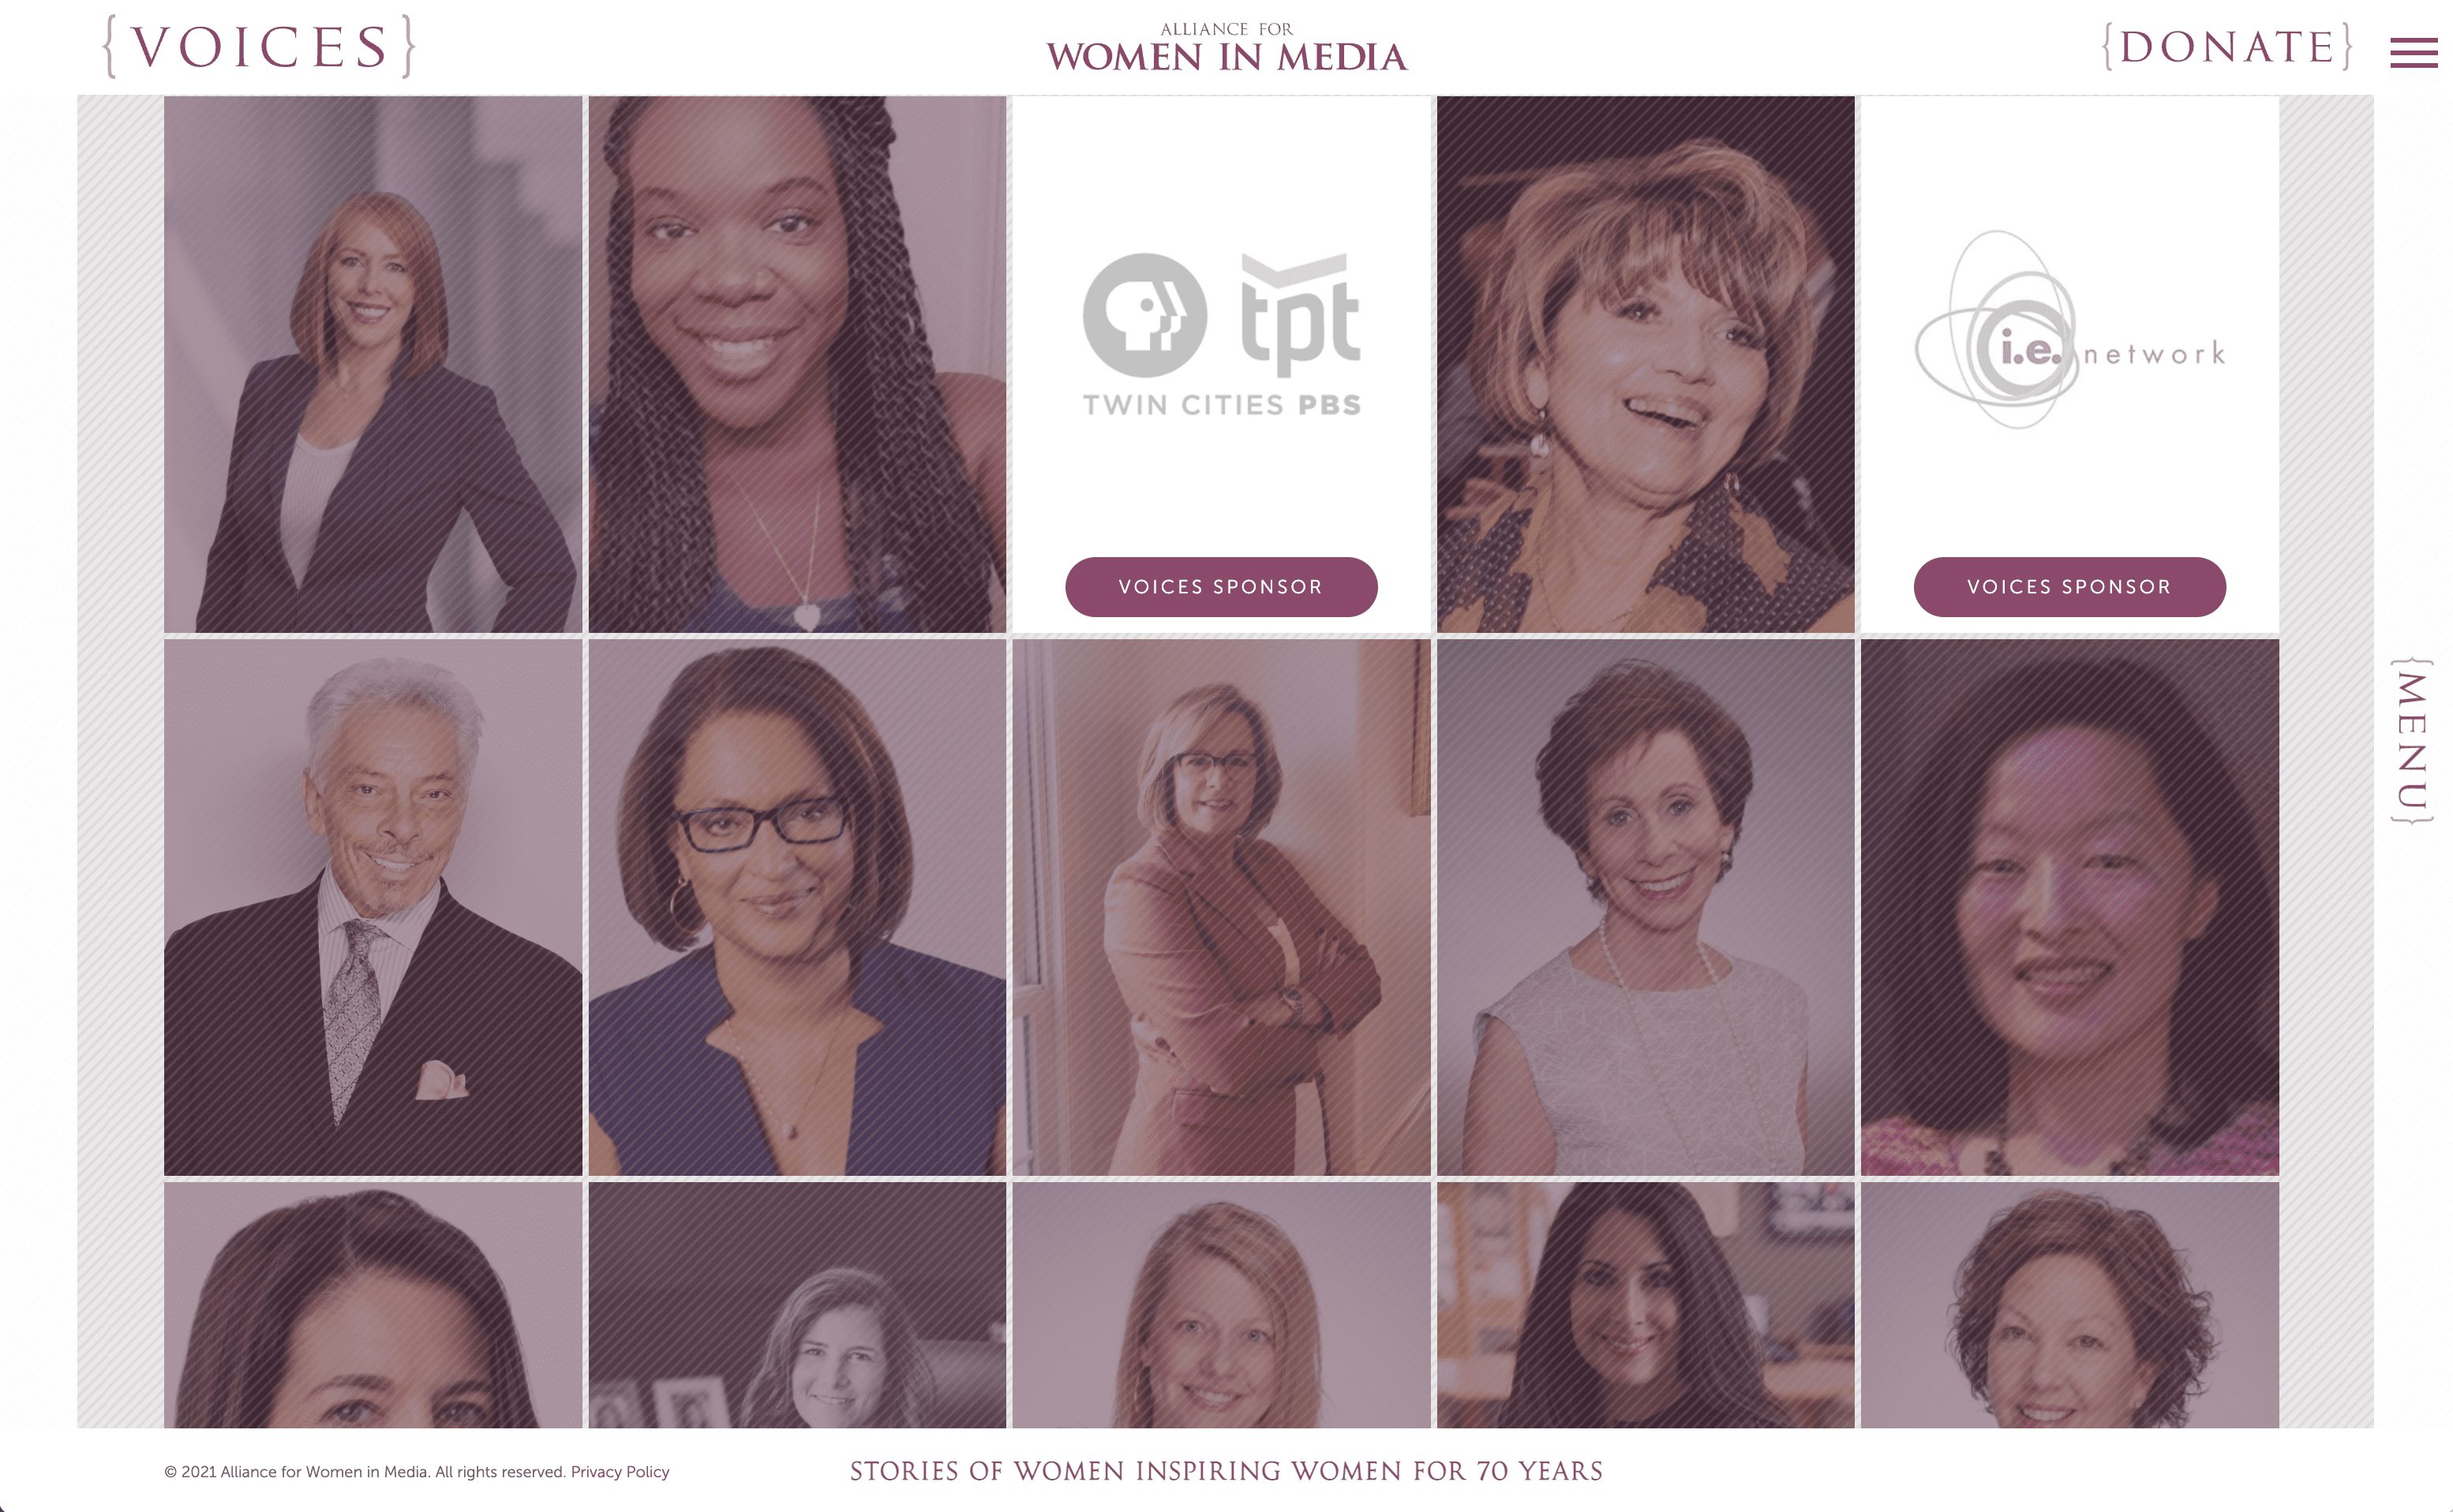 Alliance for Women in Media microsite web page